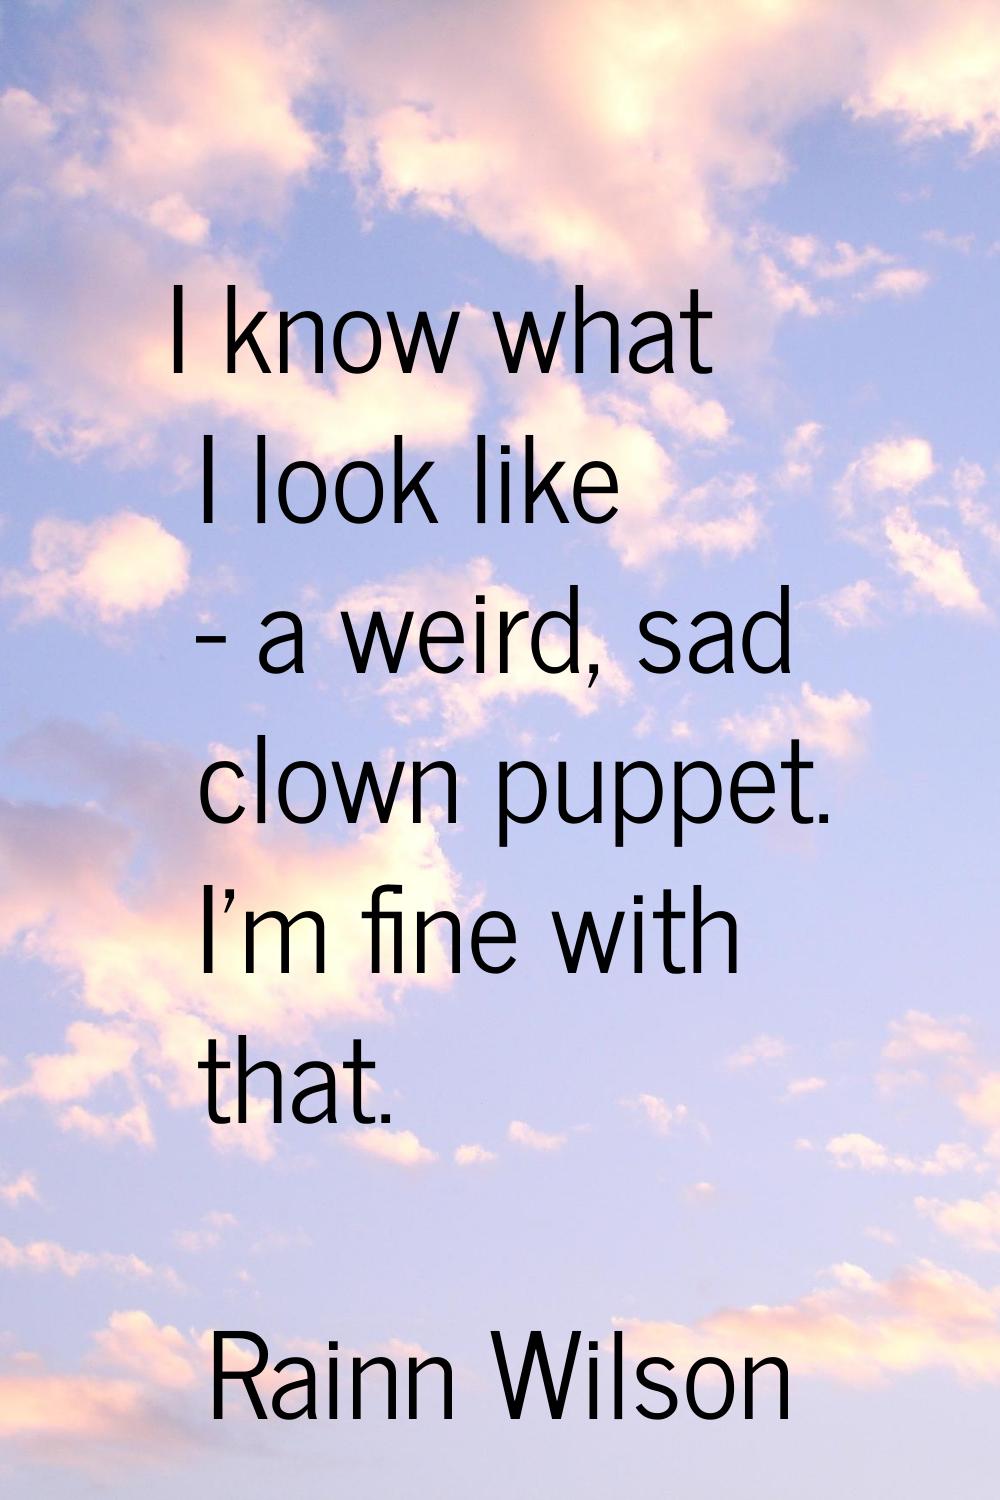 I know what I look like - a weird, sad clown puppet. I'm fine with that.